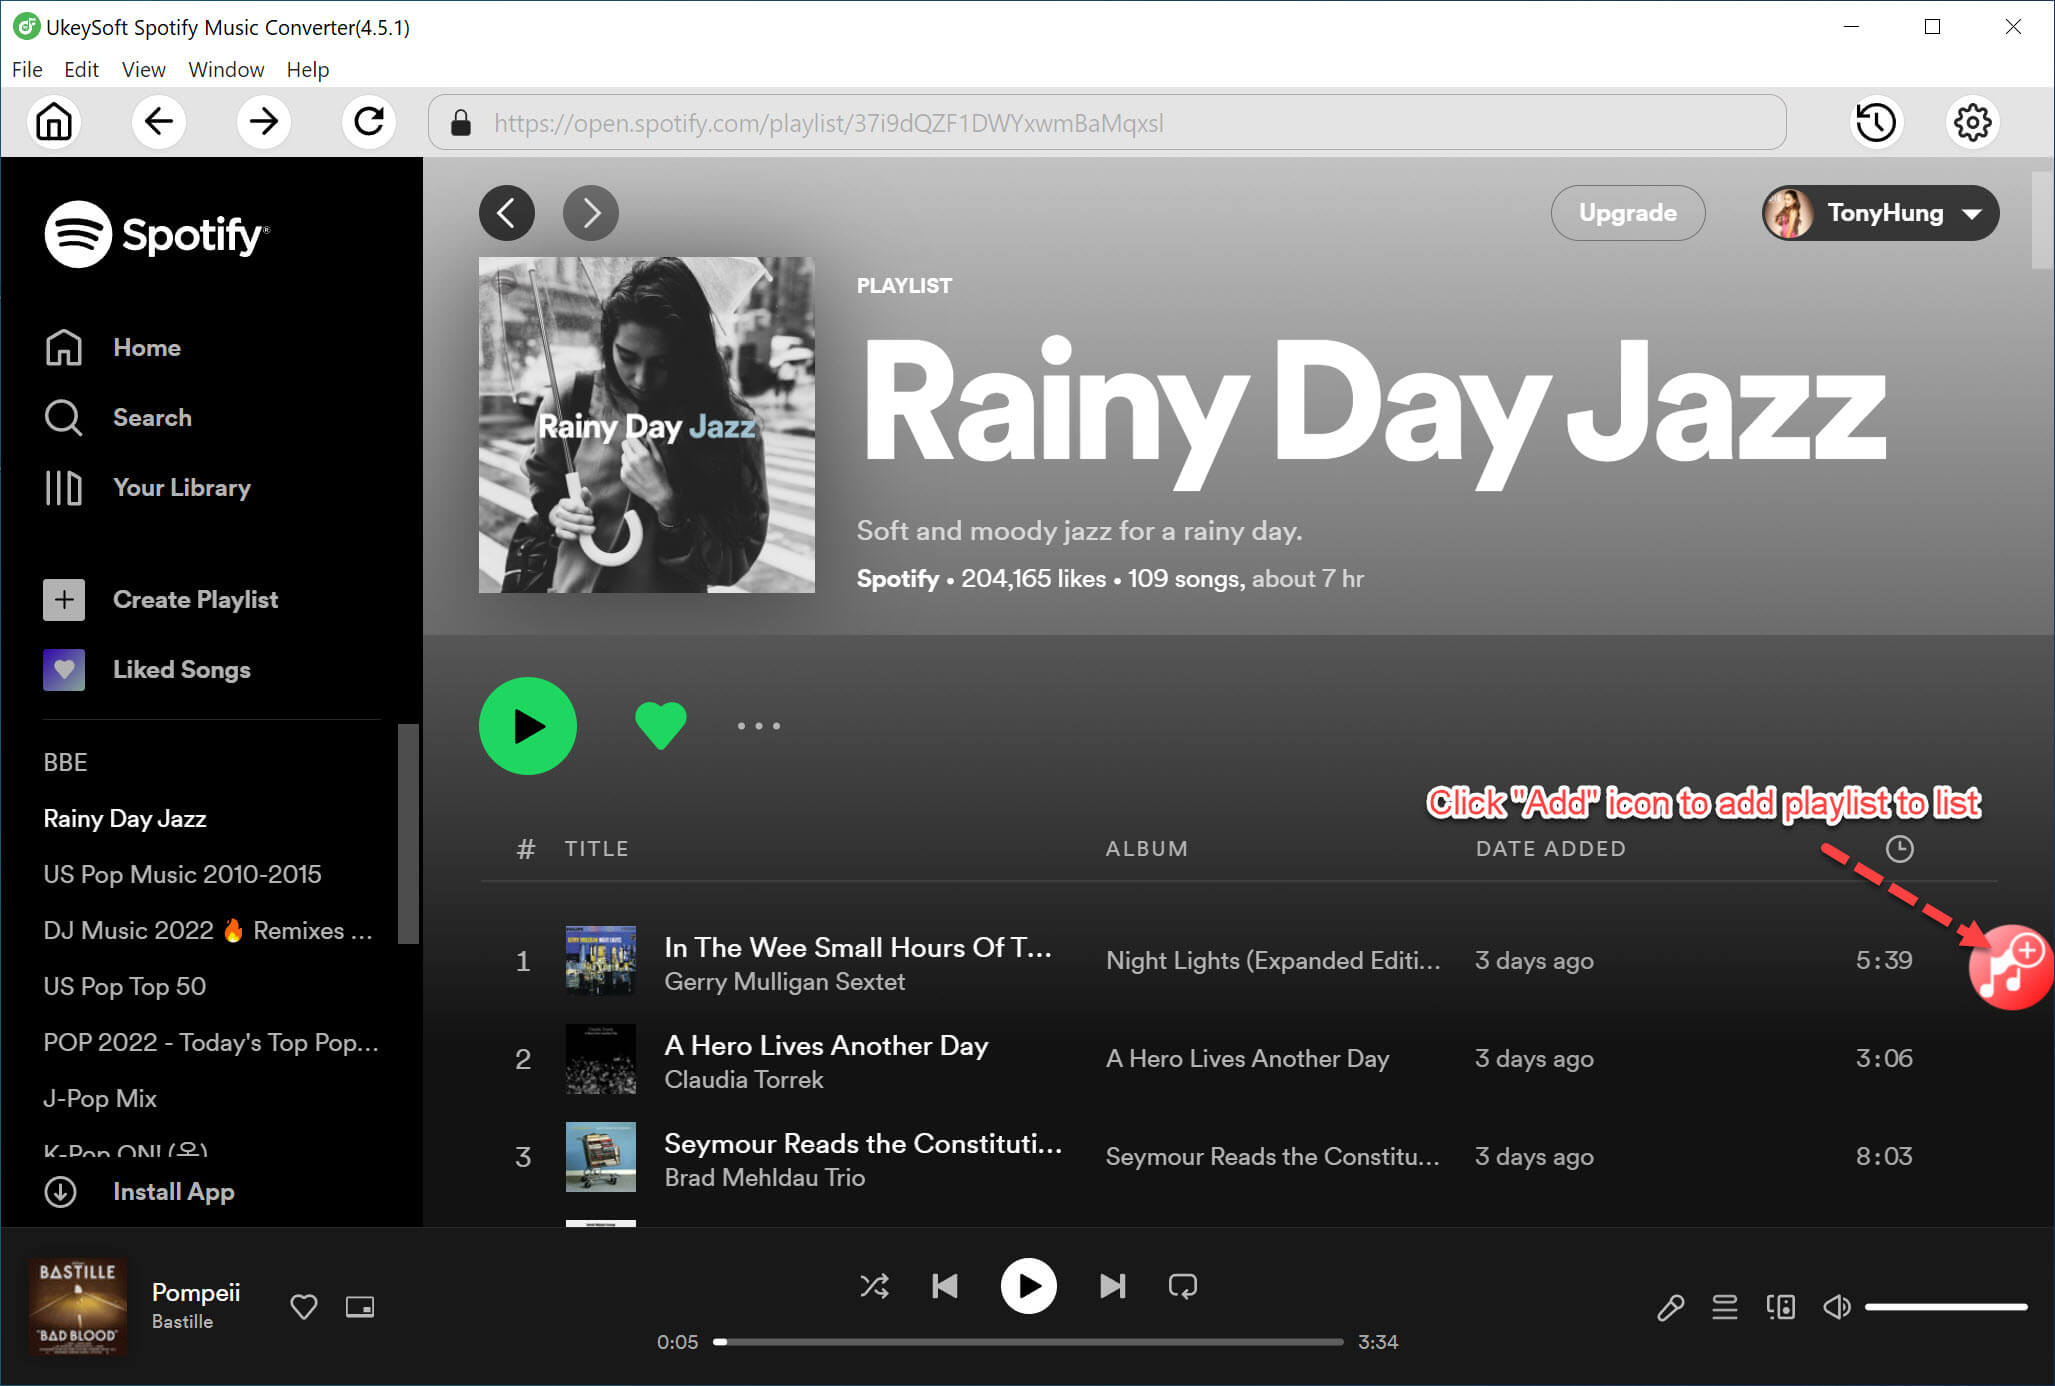 download entire spotify playlist to mp3 reddit